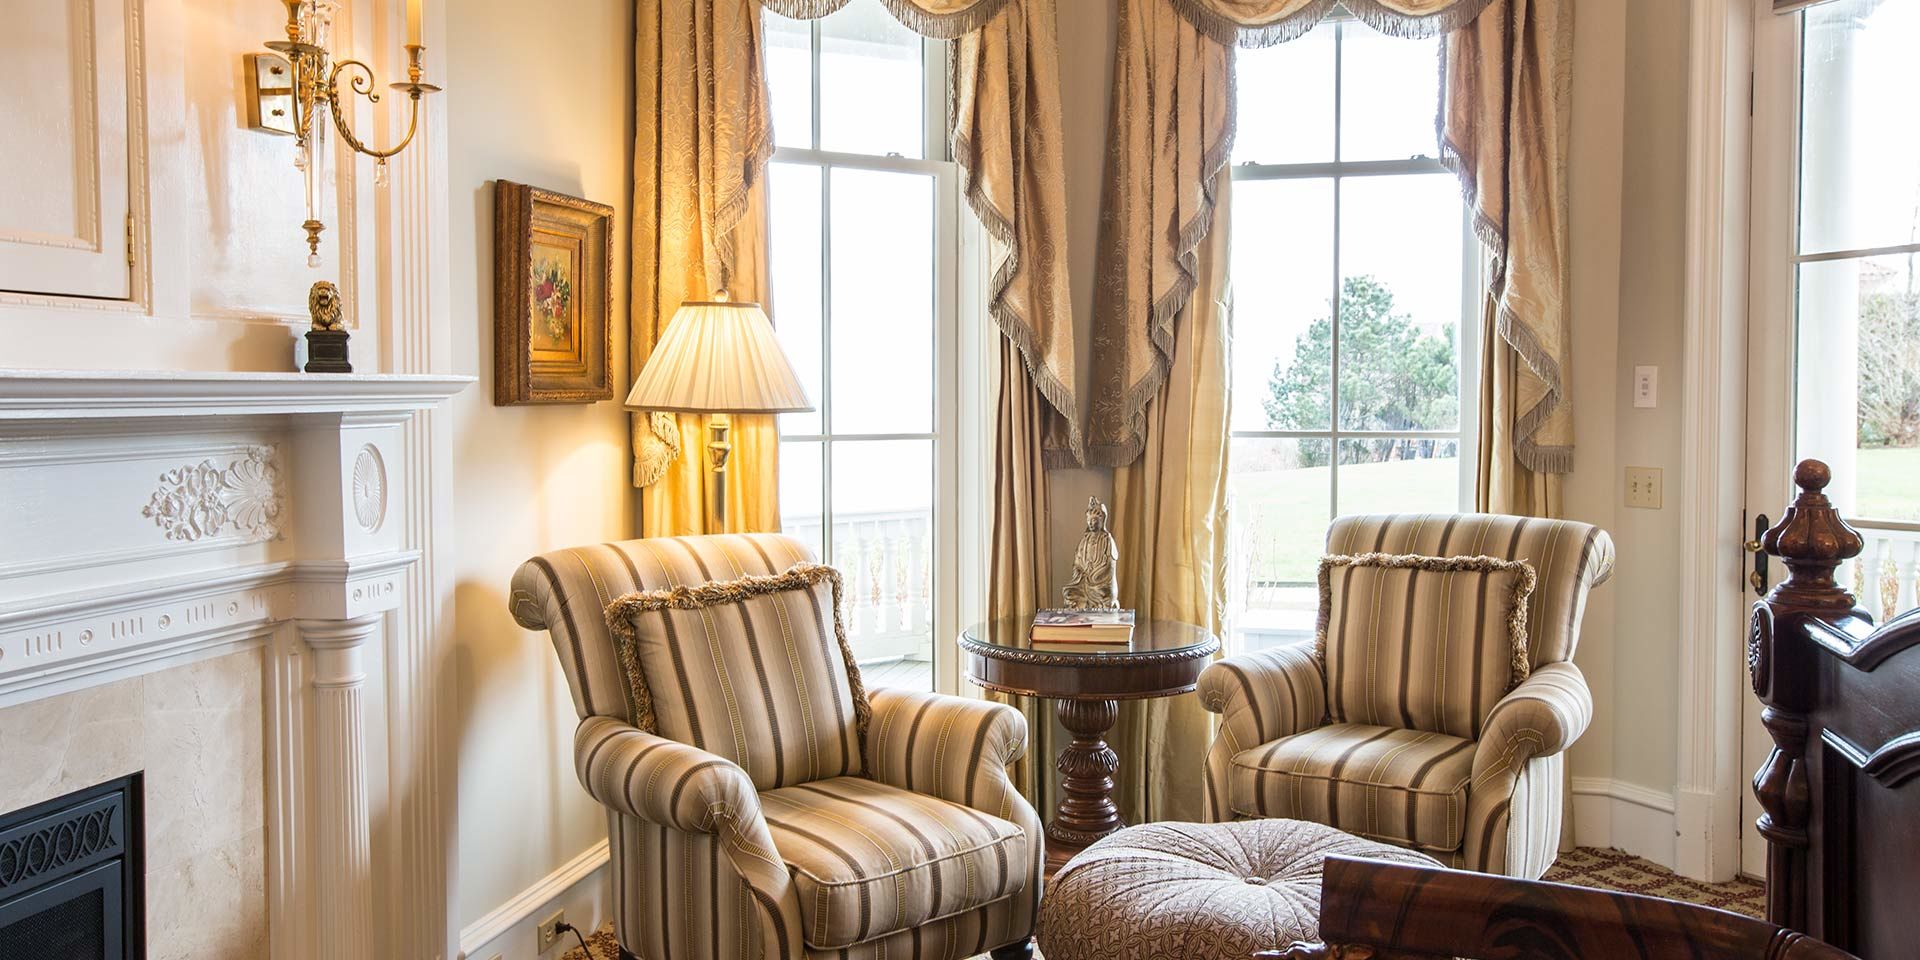 Sitting area of the Regency Guest Room 